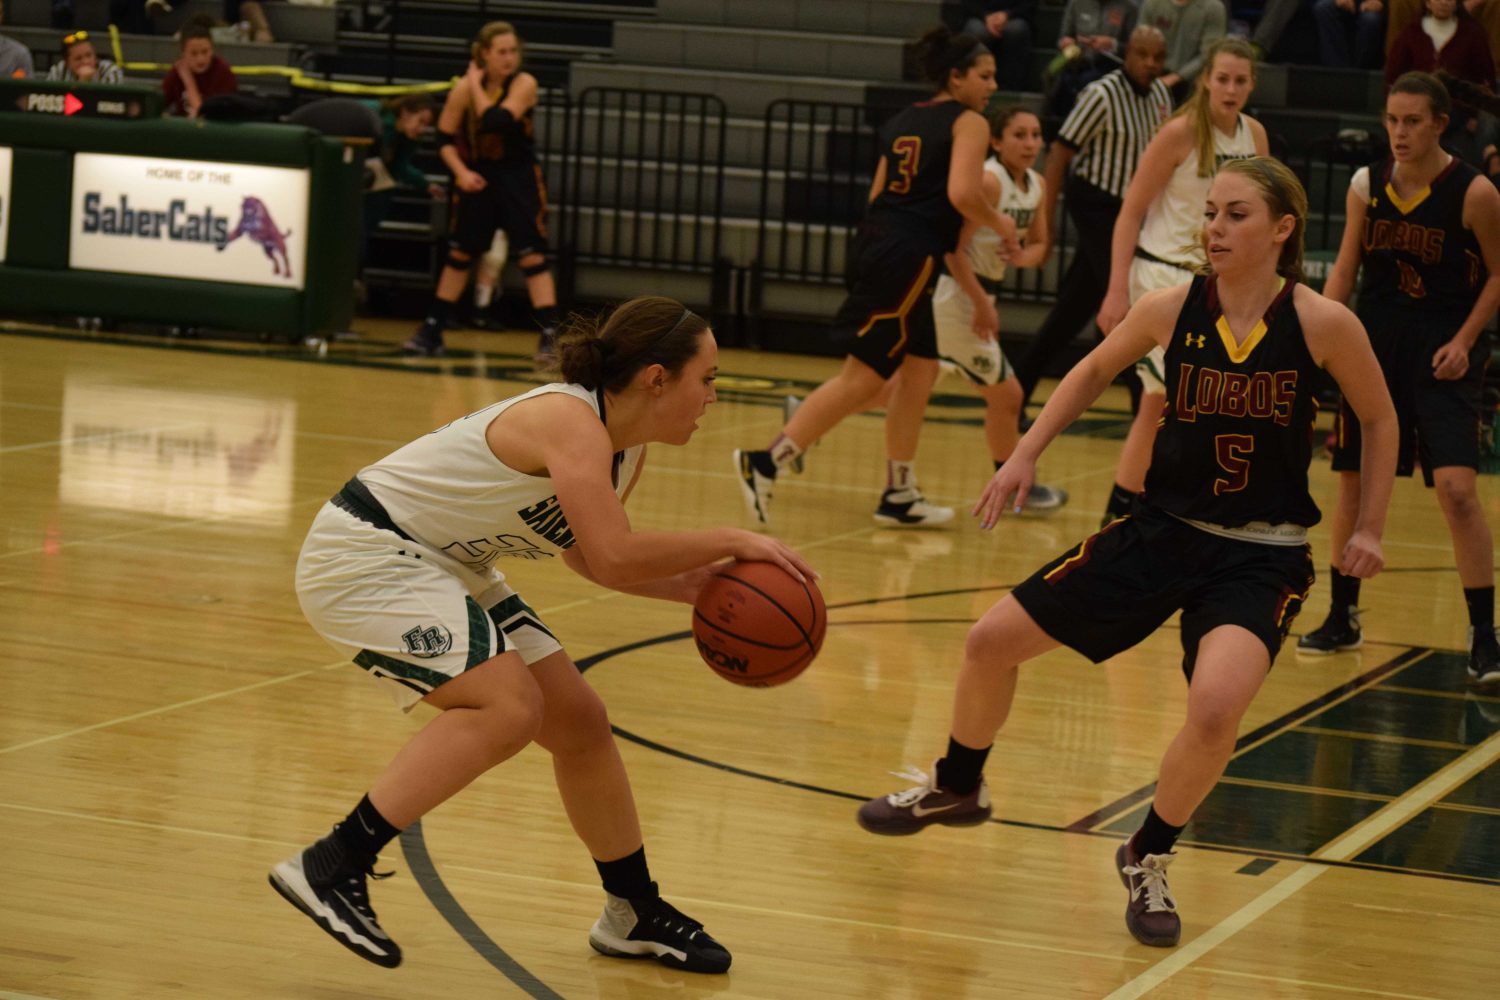 Reaghan Lang drives to the basket and pulls up to take a shot. Photo Credit: Haley Rockwell